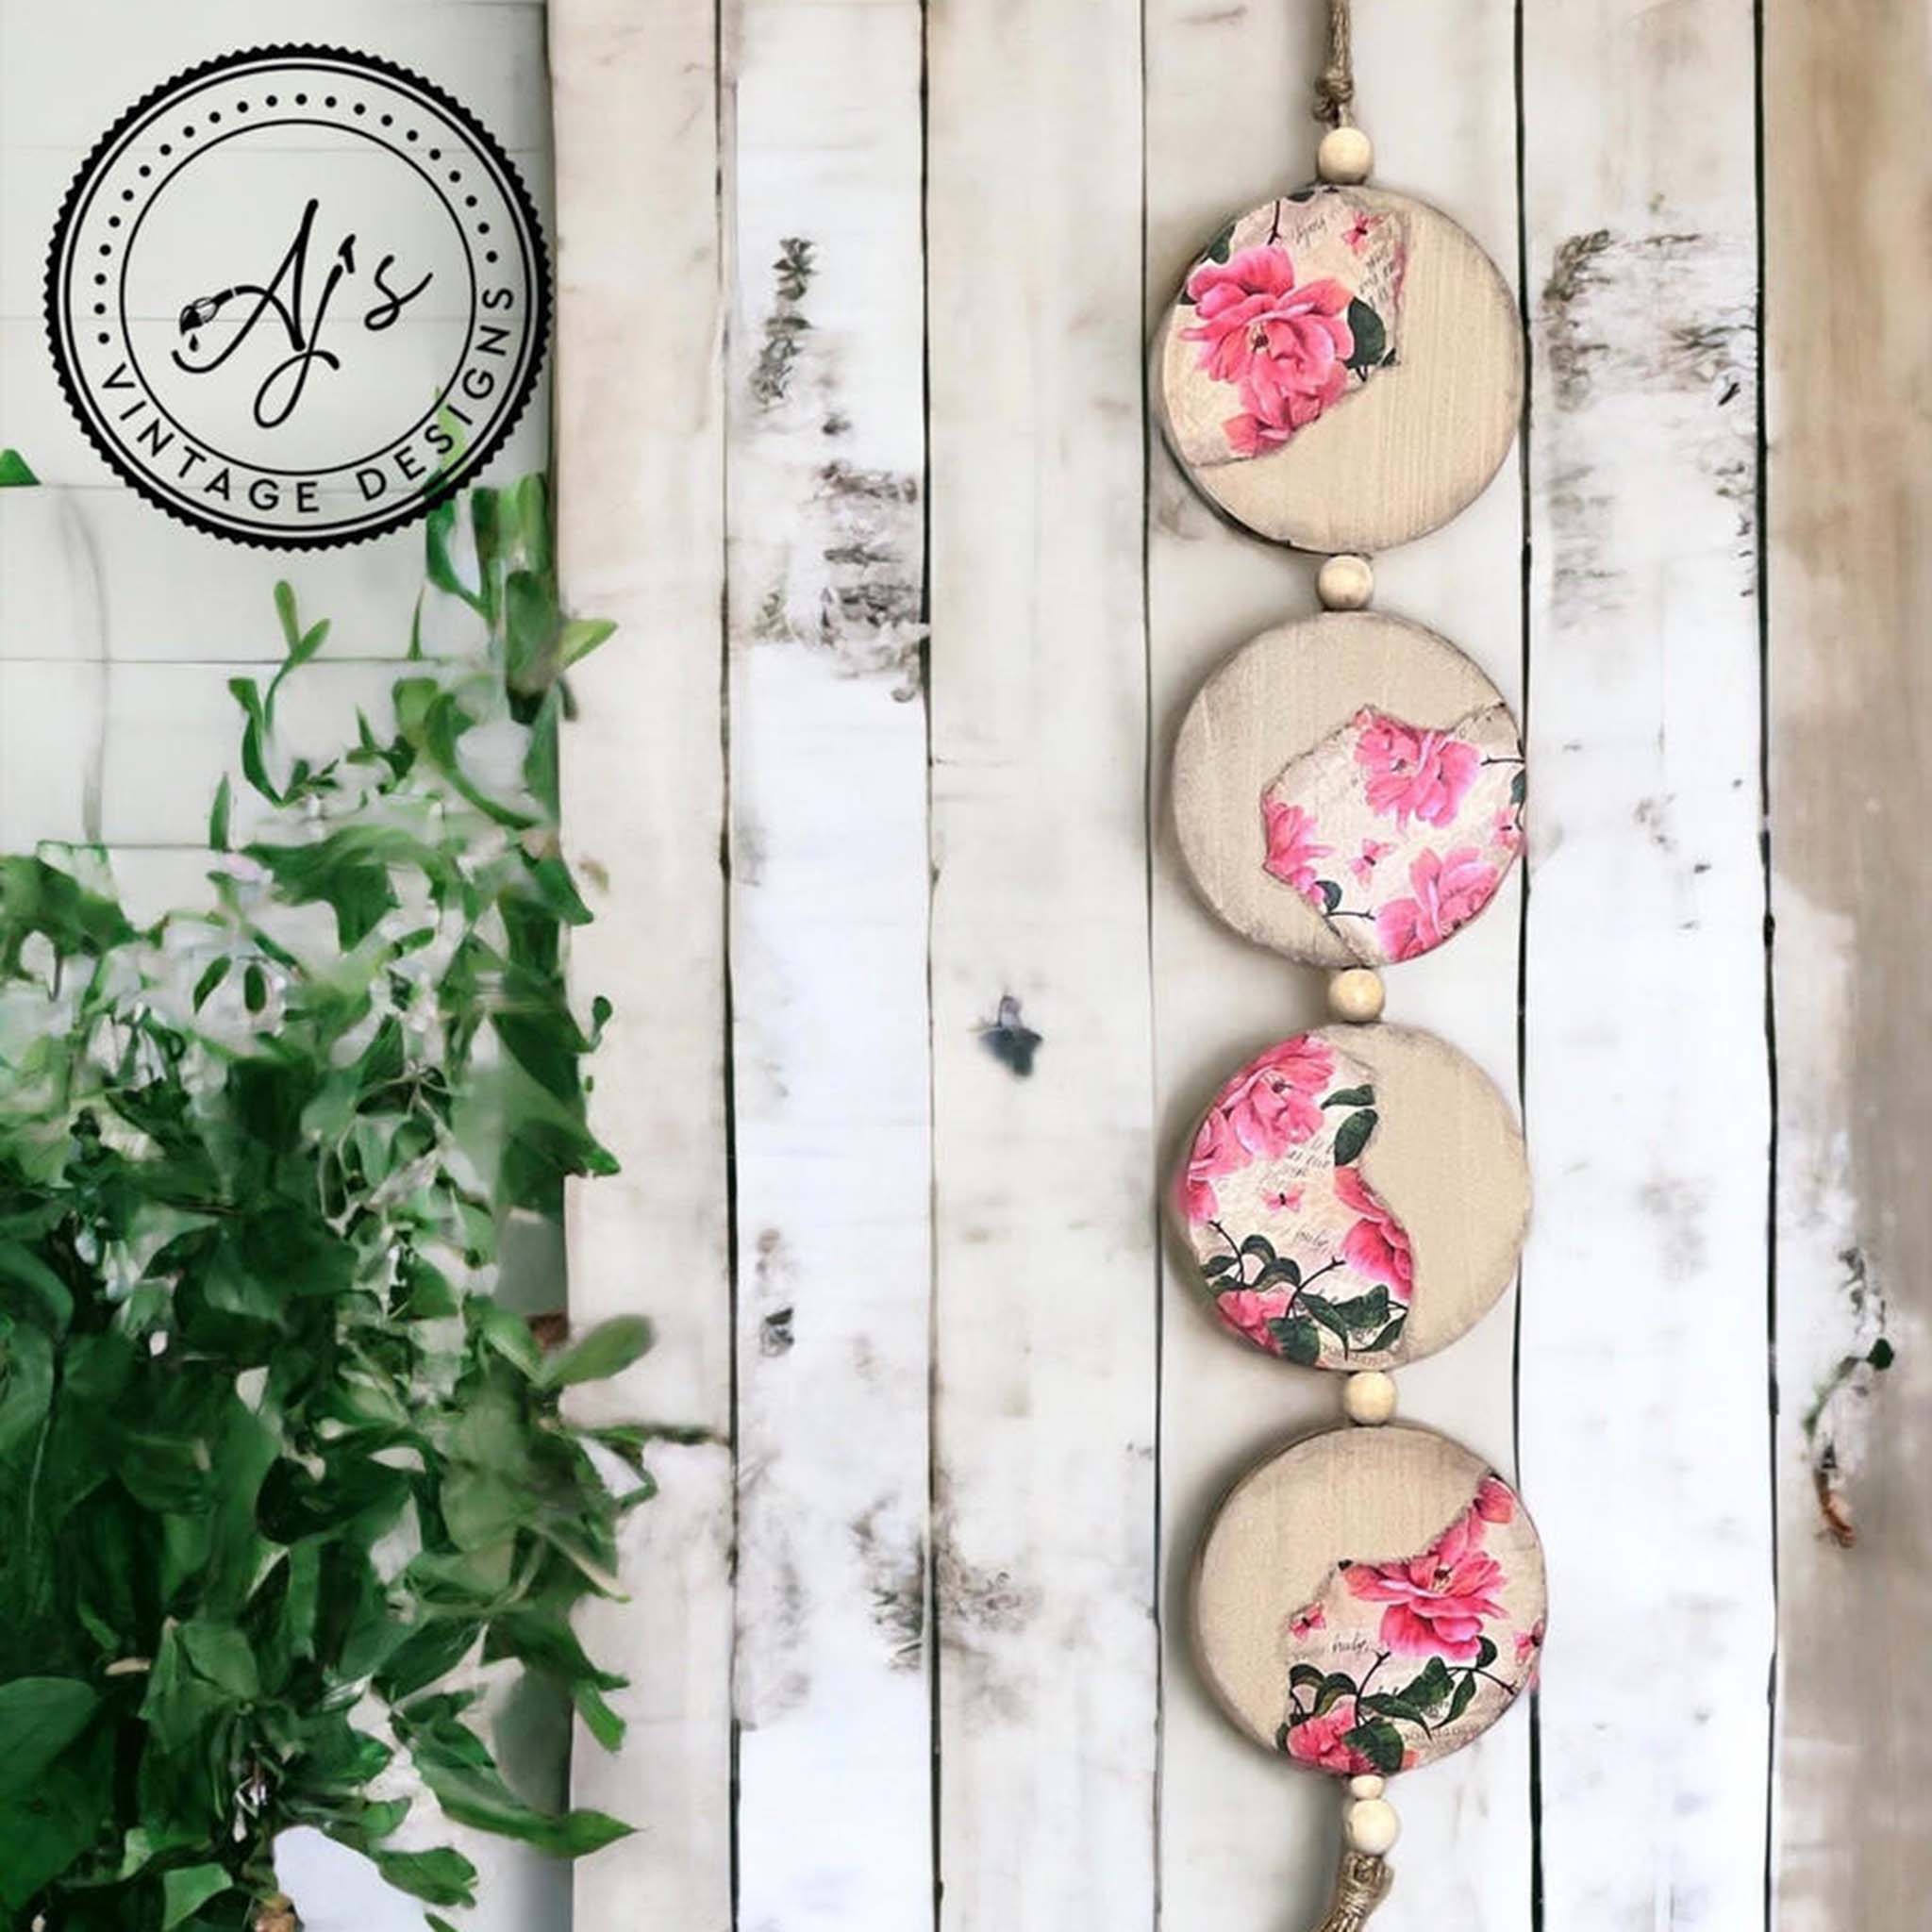 A wood hanging decor with 4 large wood rounds created by Aj's Vintage Designs feature Belles and Whistles Vintage Wallpaper A1 rice paper.